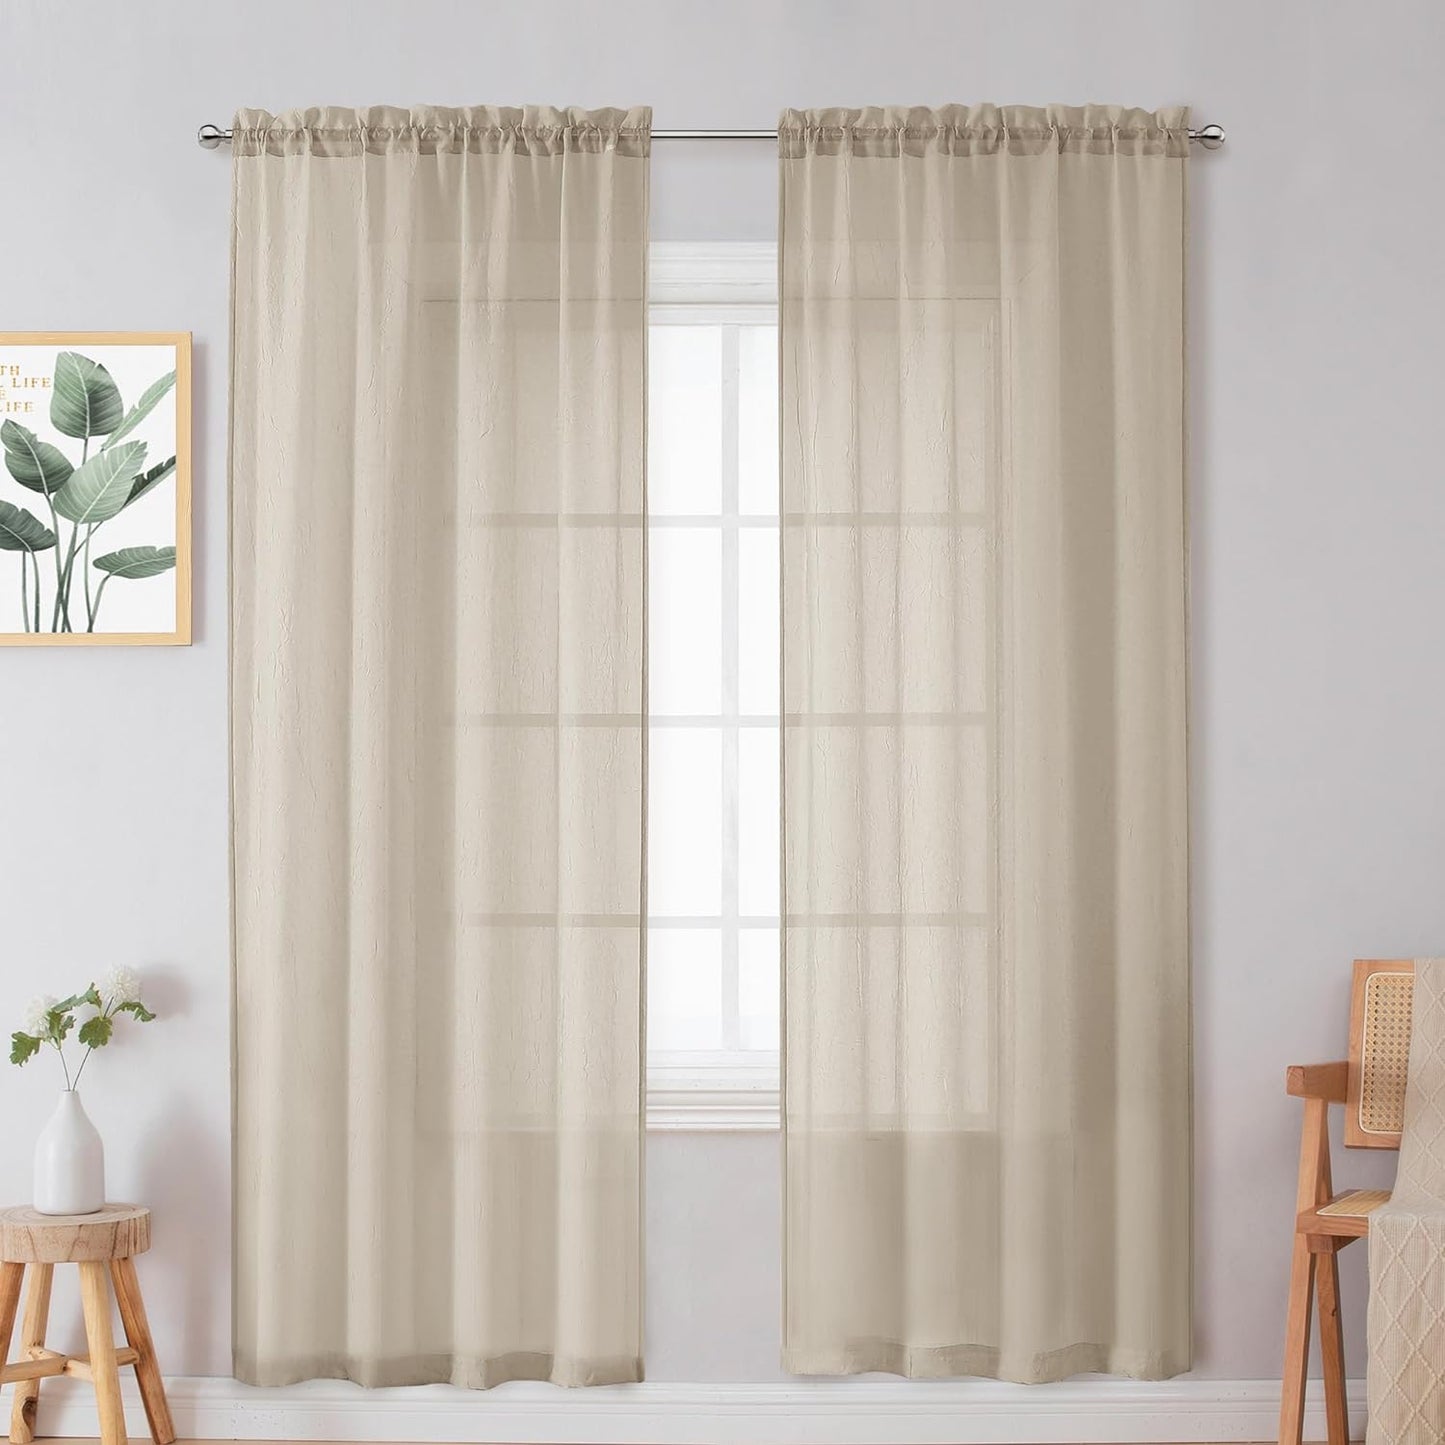 Chyhomenyc Crushed White Sheer Valances for Window 14 Inch Length 2 PCS, Crinkle Voile Short Kitchen Curtains with Dual Rod Pockets，Gauzy Bedroom Curtain Valance，Each 42Wx14L Inches  Chyhomenyc Taupe 42 W X 72 L 